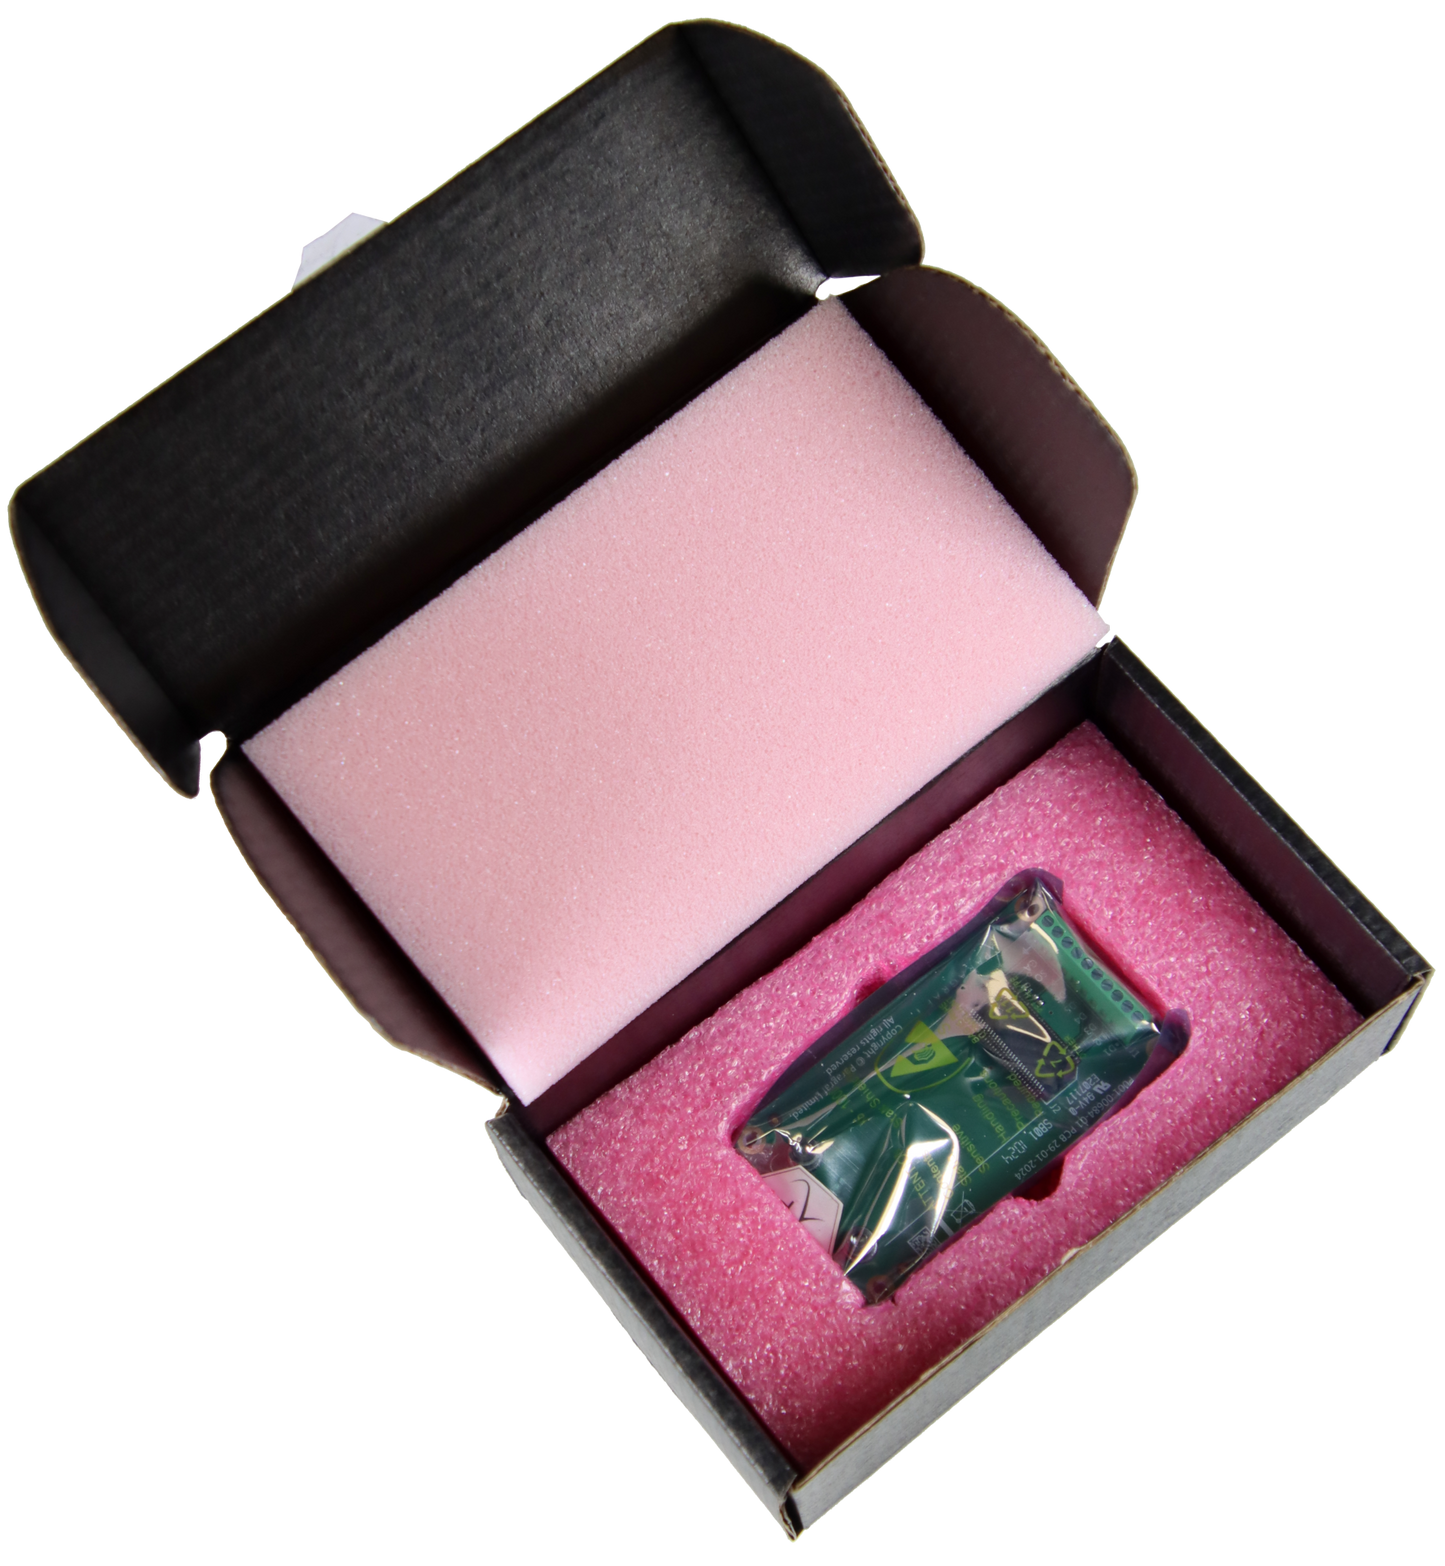 Black packaging for the PiG open showing the product in an ESD bag surrounded by pink foam